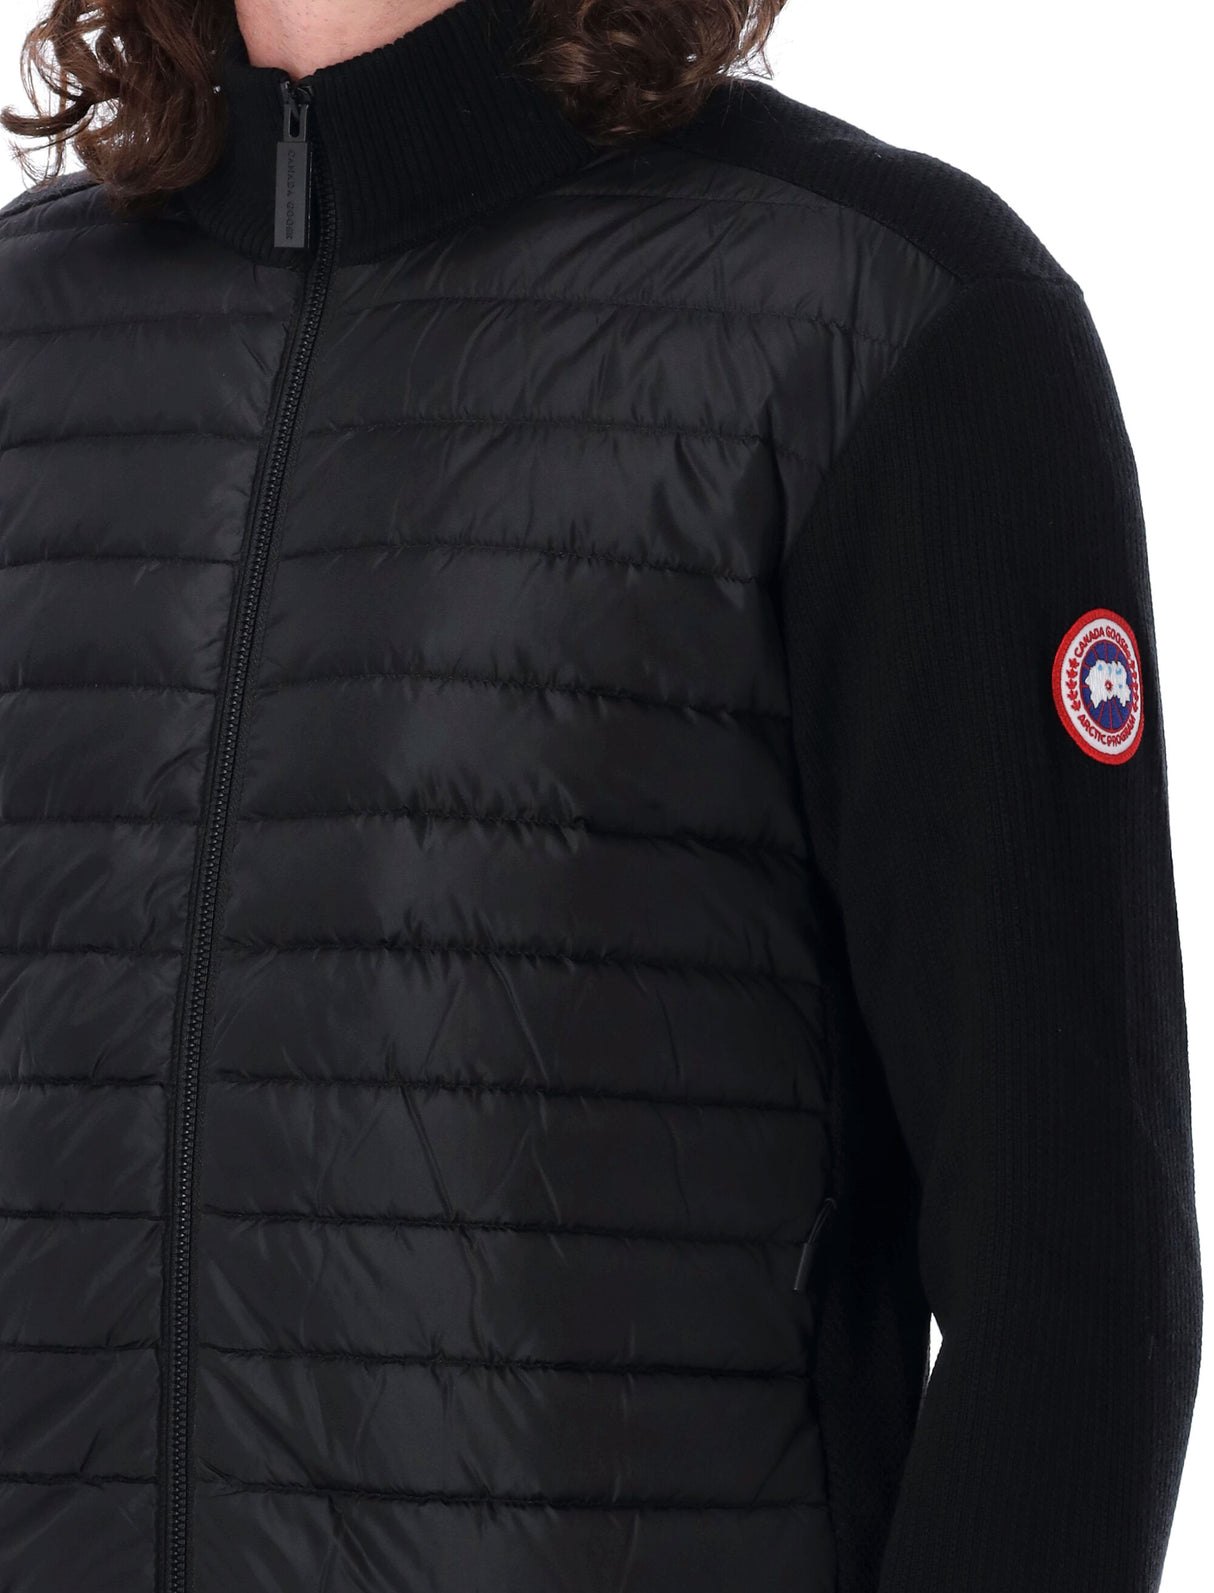 CANADA GOOSE Men's Black Knit Down Jacket with Quilted Front and Perforated Knit Sleeves